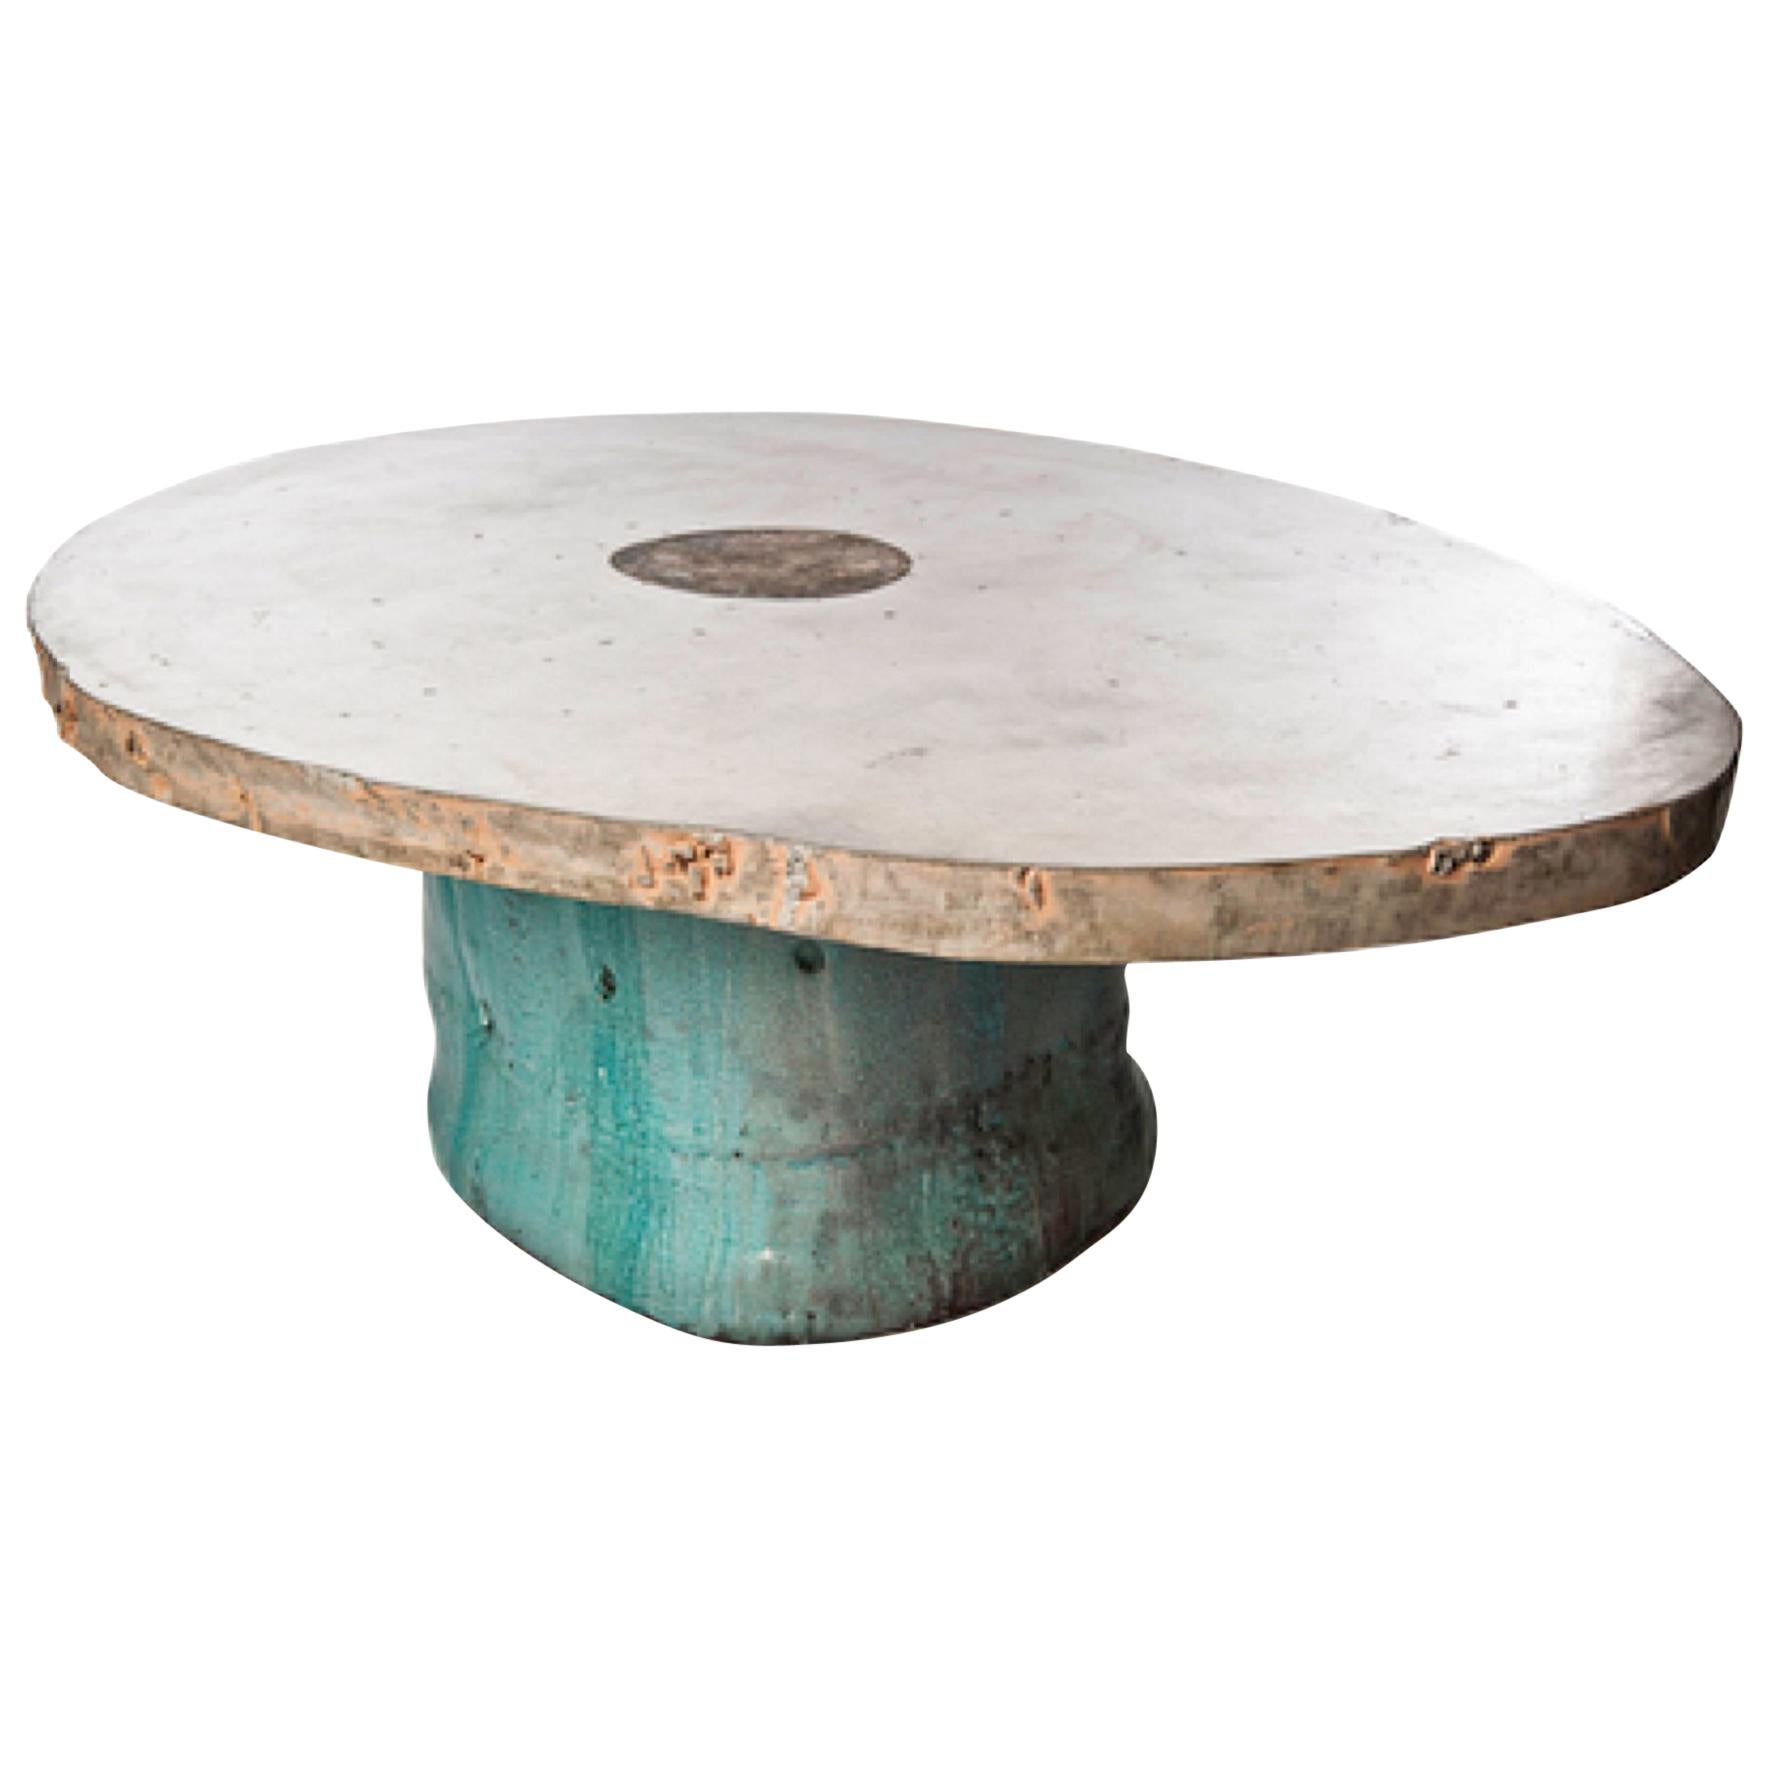 Low Table in Ceramic with Concrete Top by Hun-Chung Lee For Sale